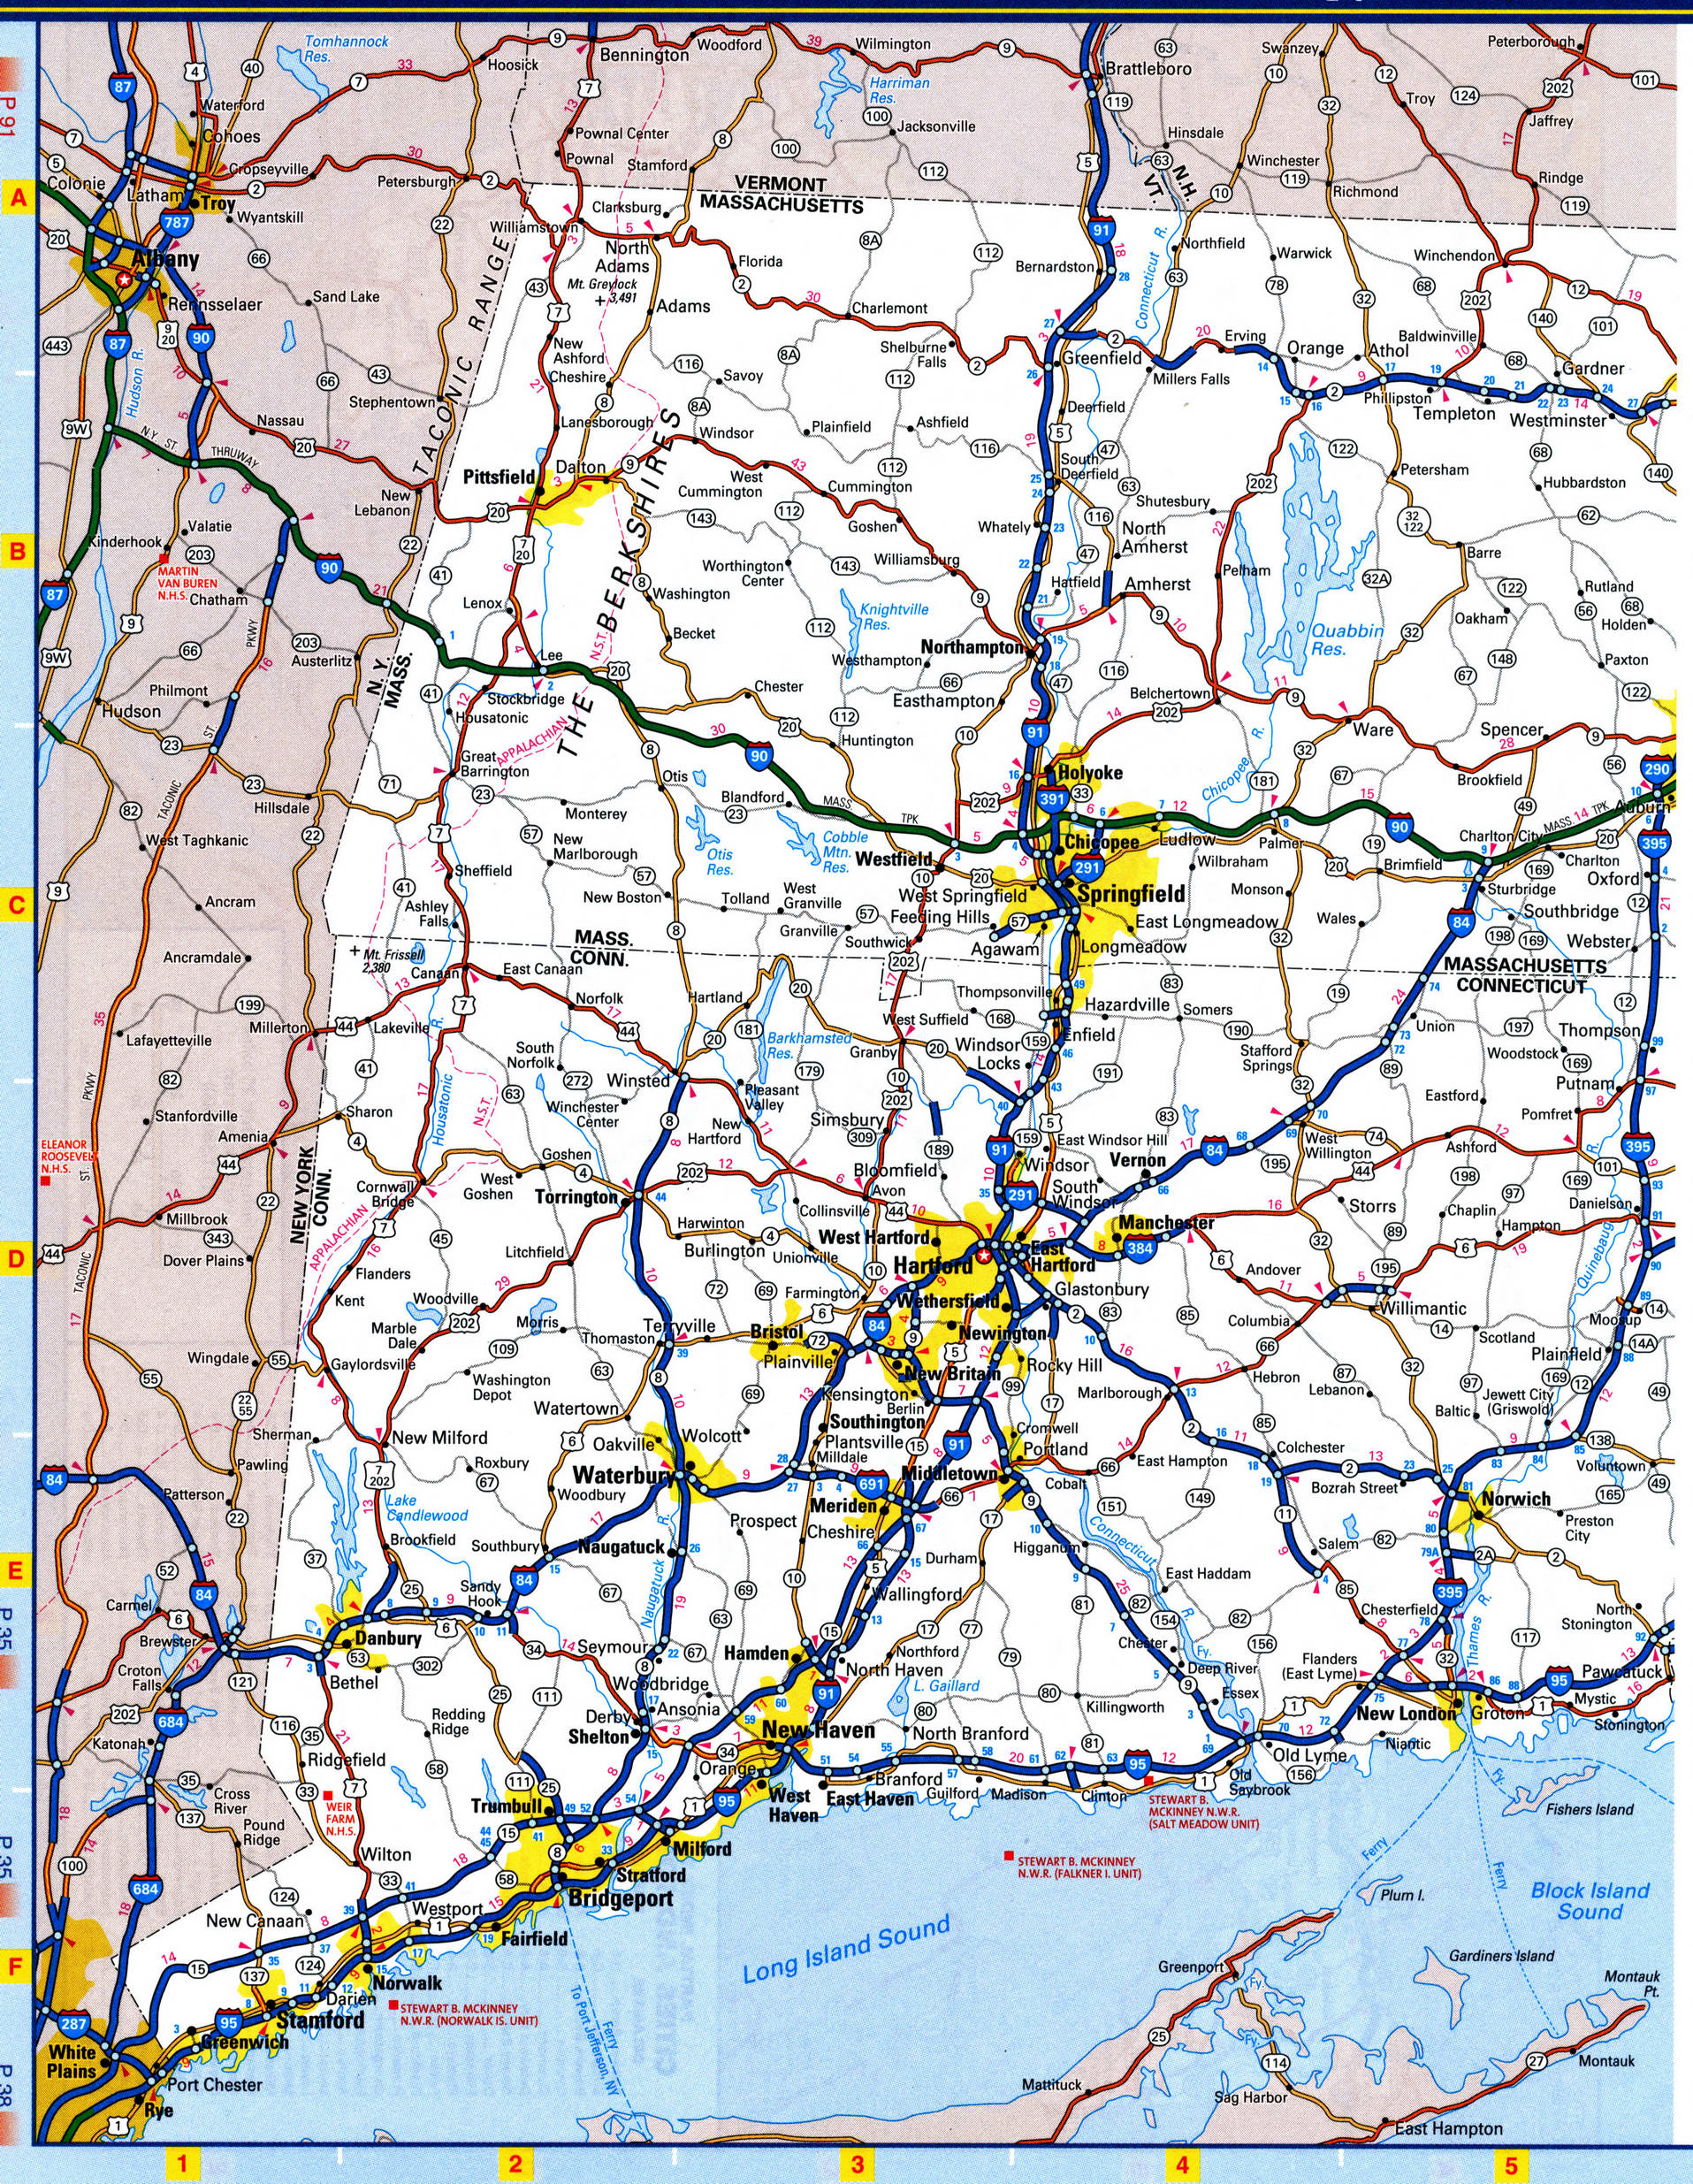 Connecticut western highway map